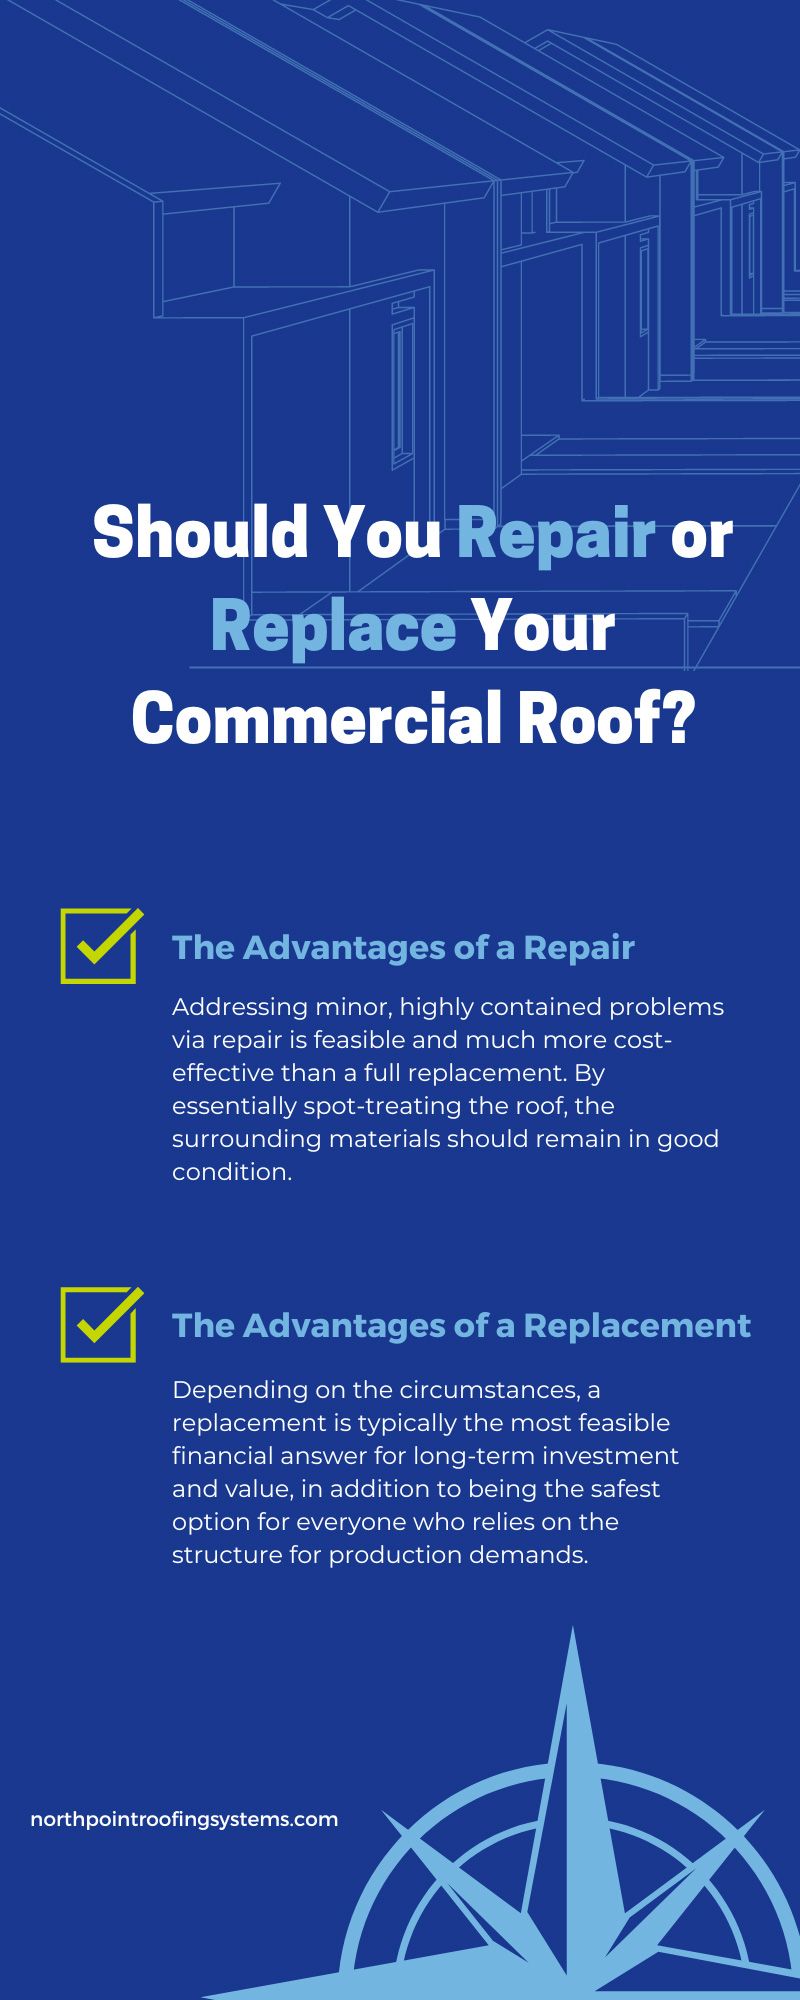 Should You Repair or Replace Your Commercial Roof?